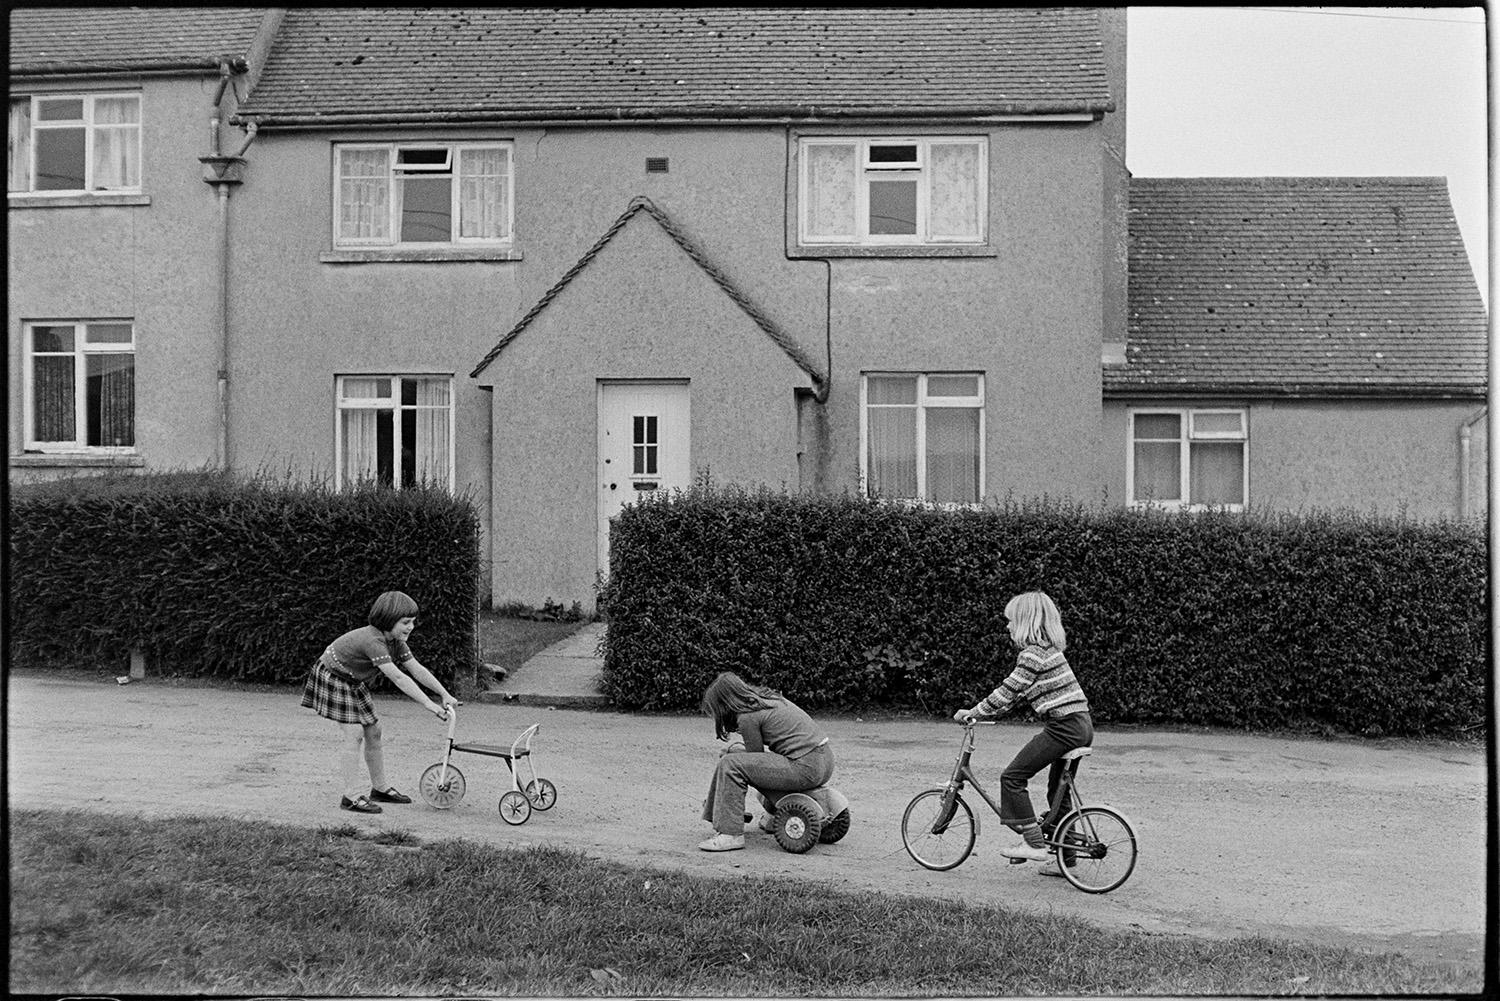 Children playing in street bicycles, tricycles. 
[Three girls playing an riding on tricycles and a bicycle on a street outside a house in Merton.]